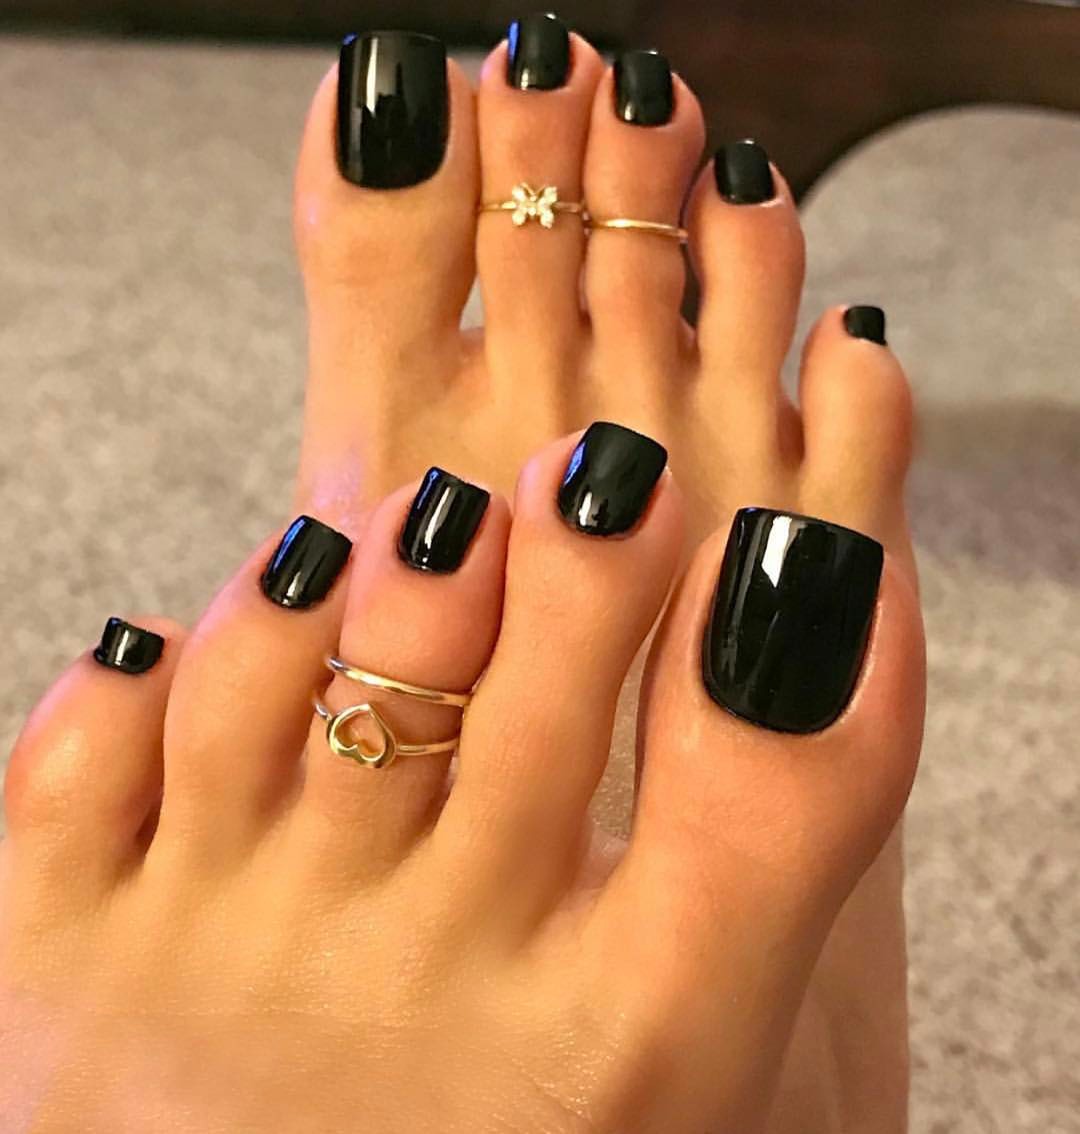 Trust in Black nail design summer and matching toenails.